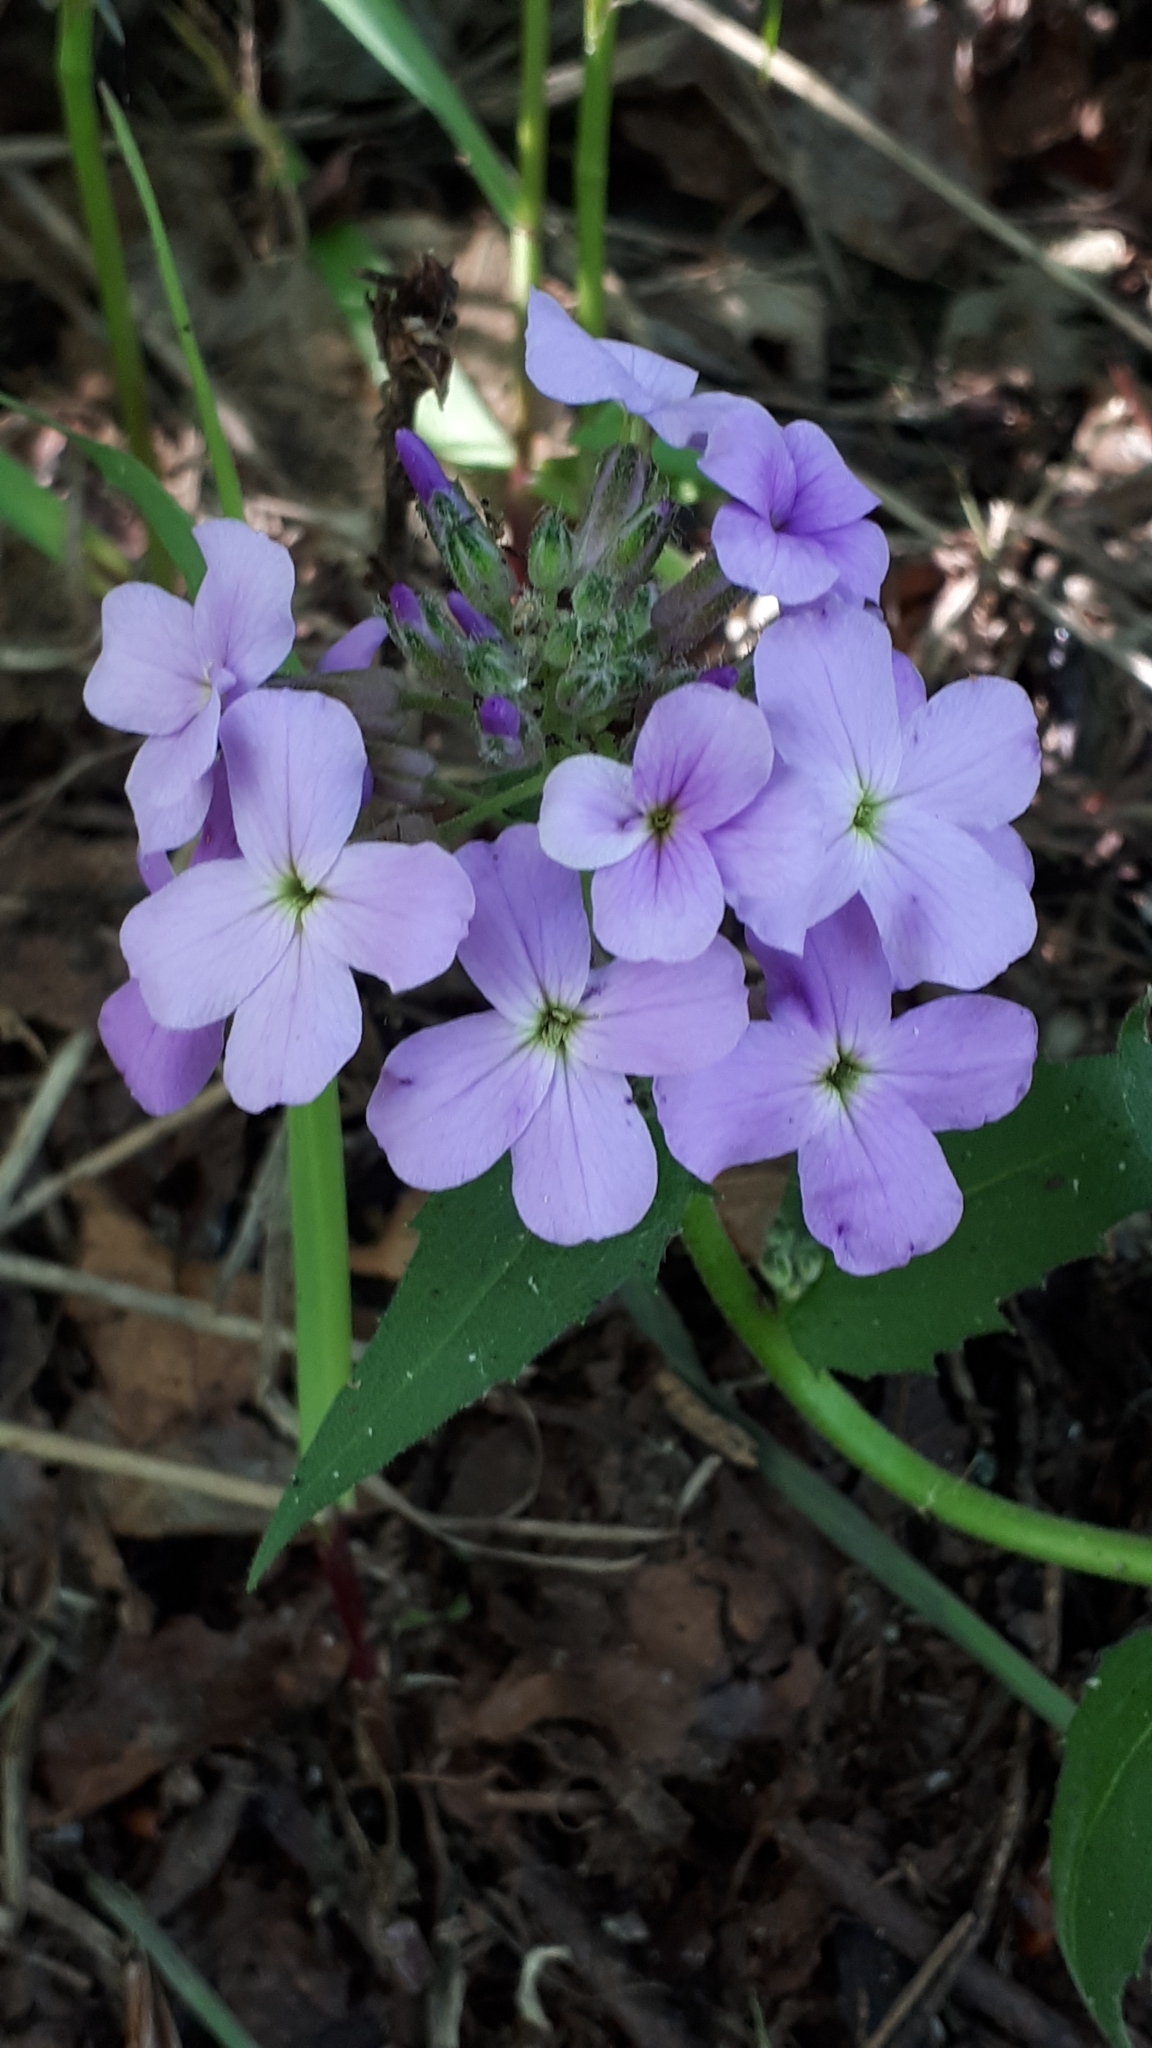 photo of Hesperis matronalis / Dame's Rocket in Gull Harbour Hecla Grindstone Prov Park, Manitoba. Photo by Séraphin Poudrier CC BY-NC